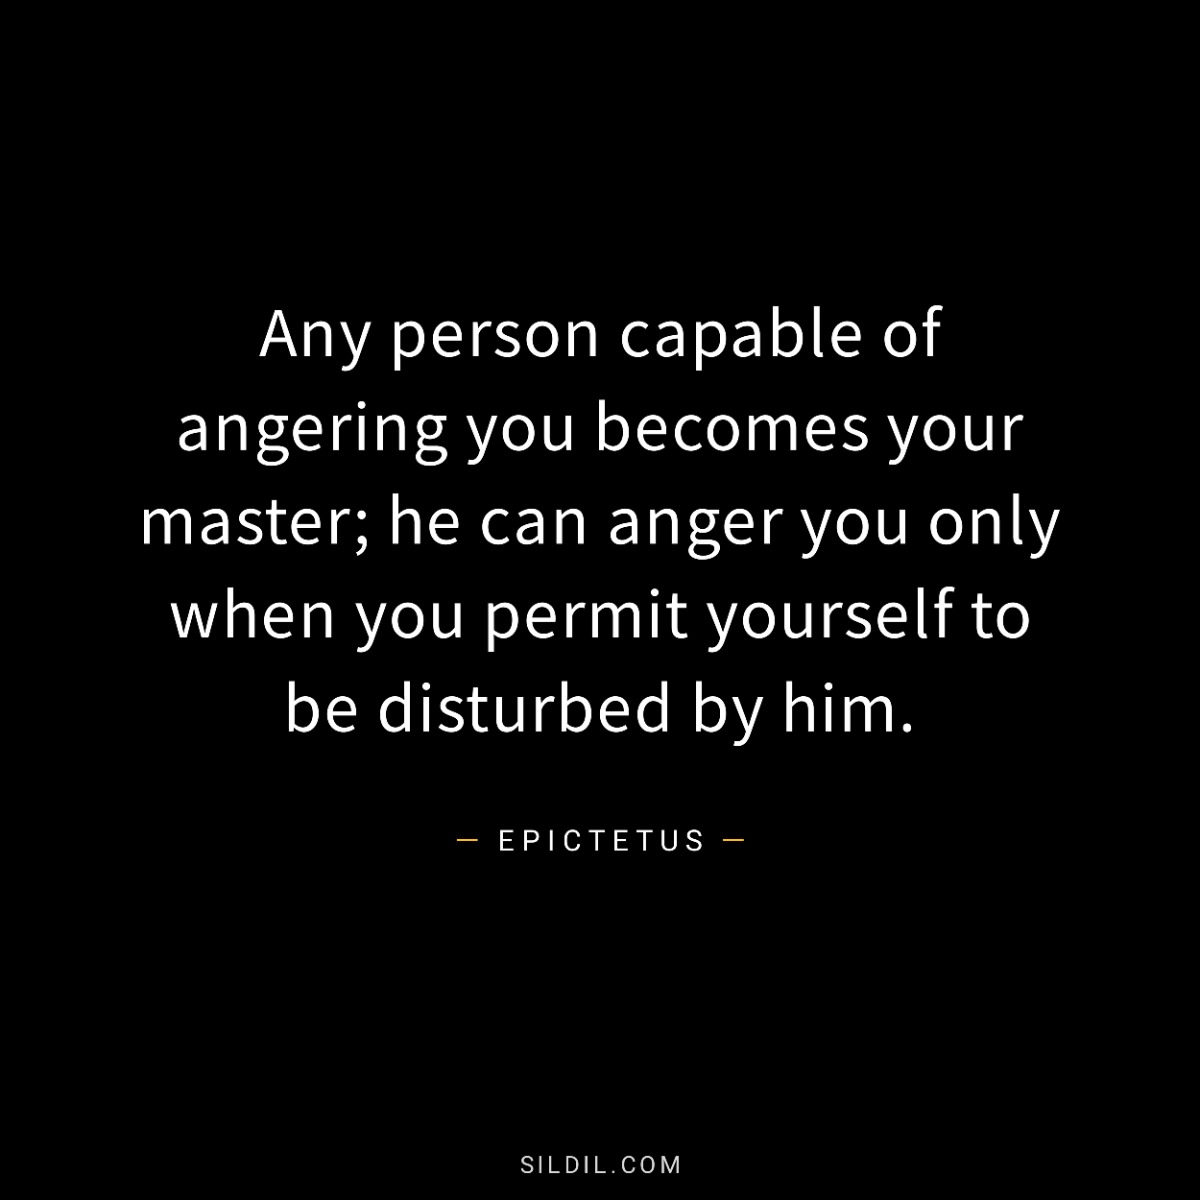 Any person capable of angering you becomes your master; he can anger you only when you permit yourself to be disturbed by him.